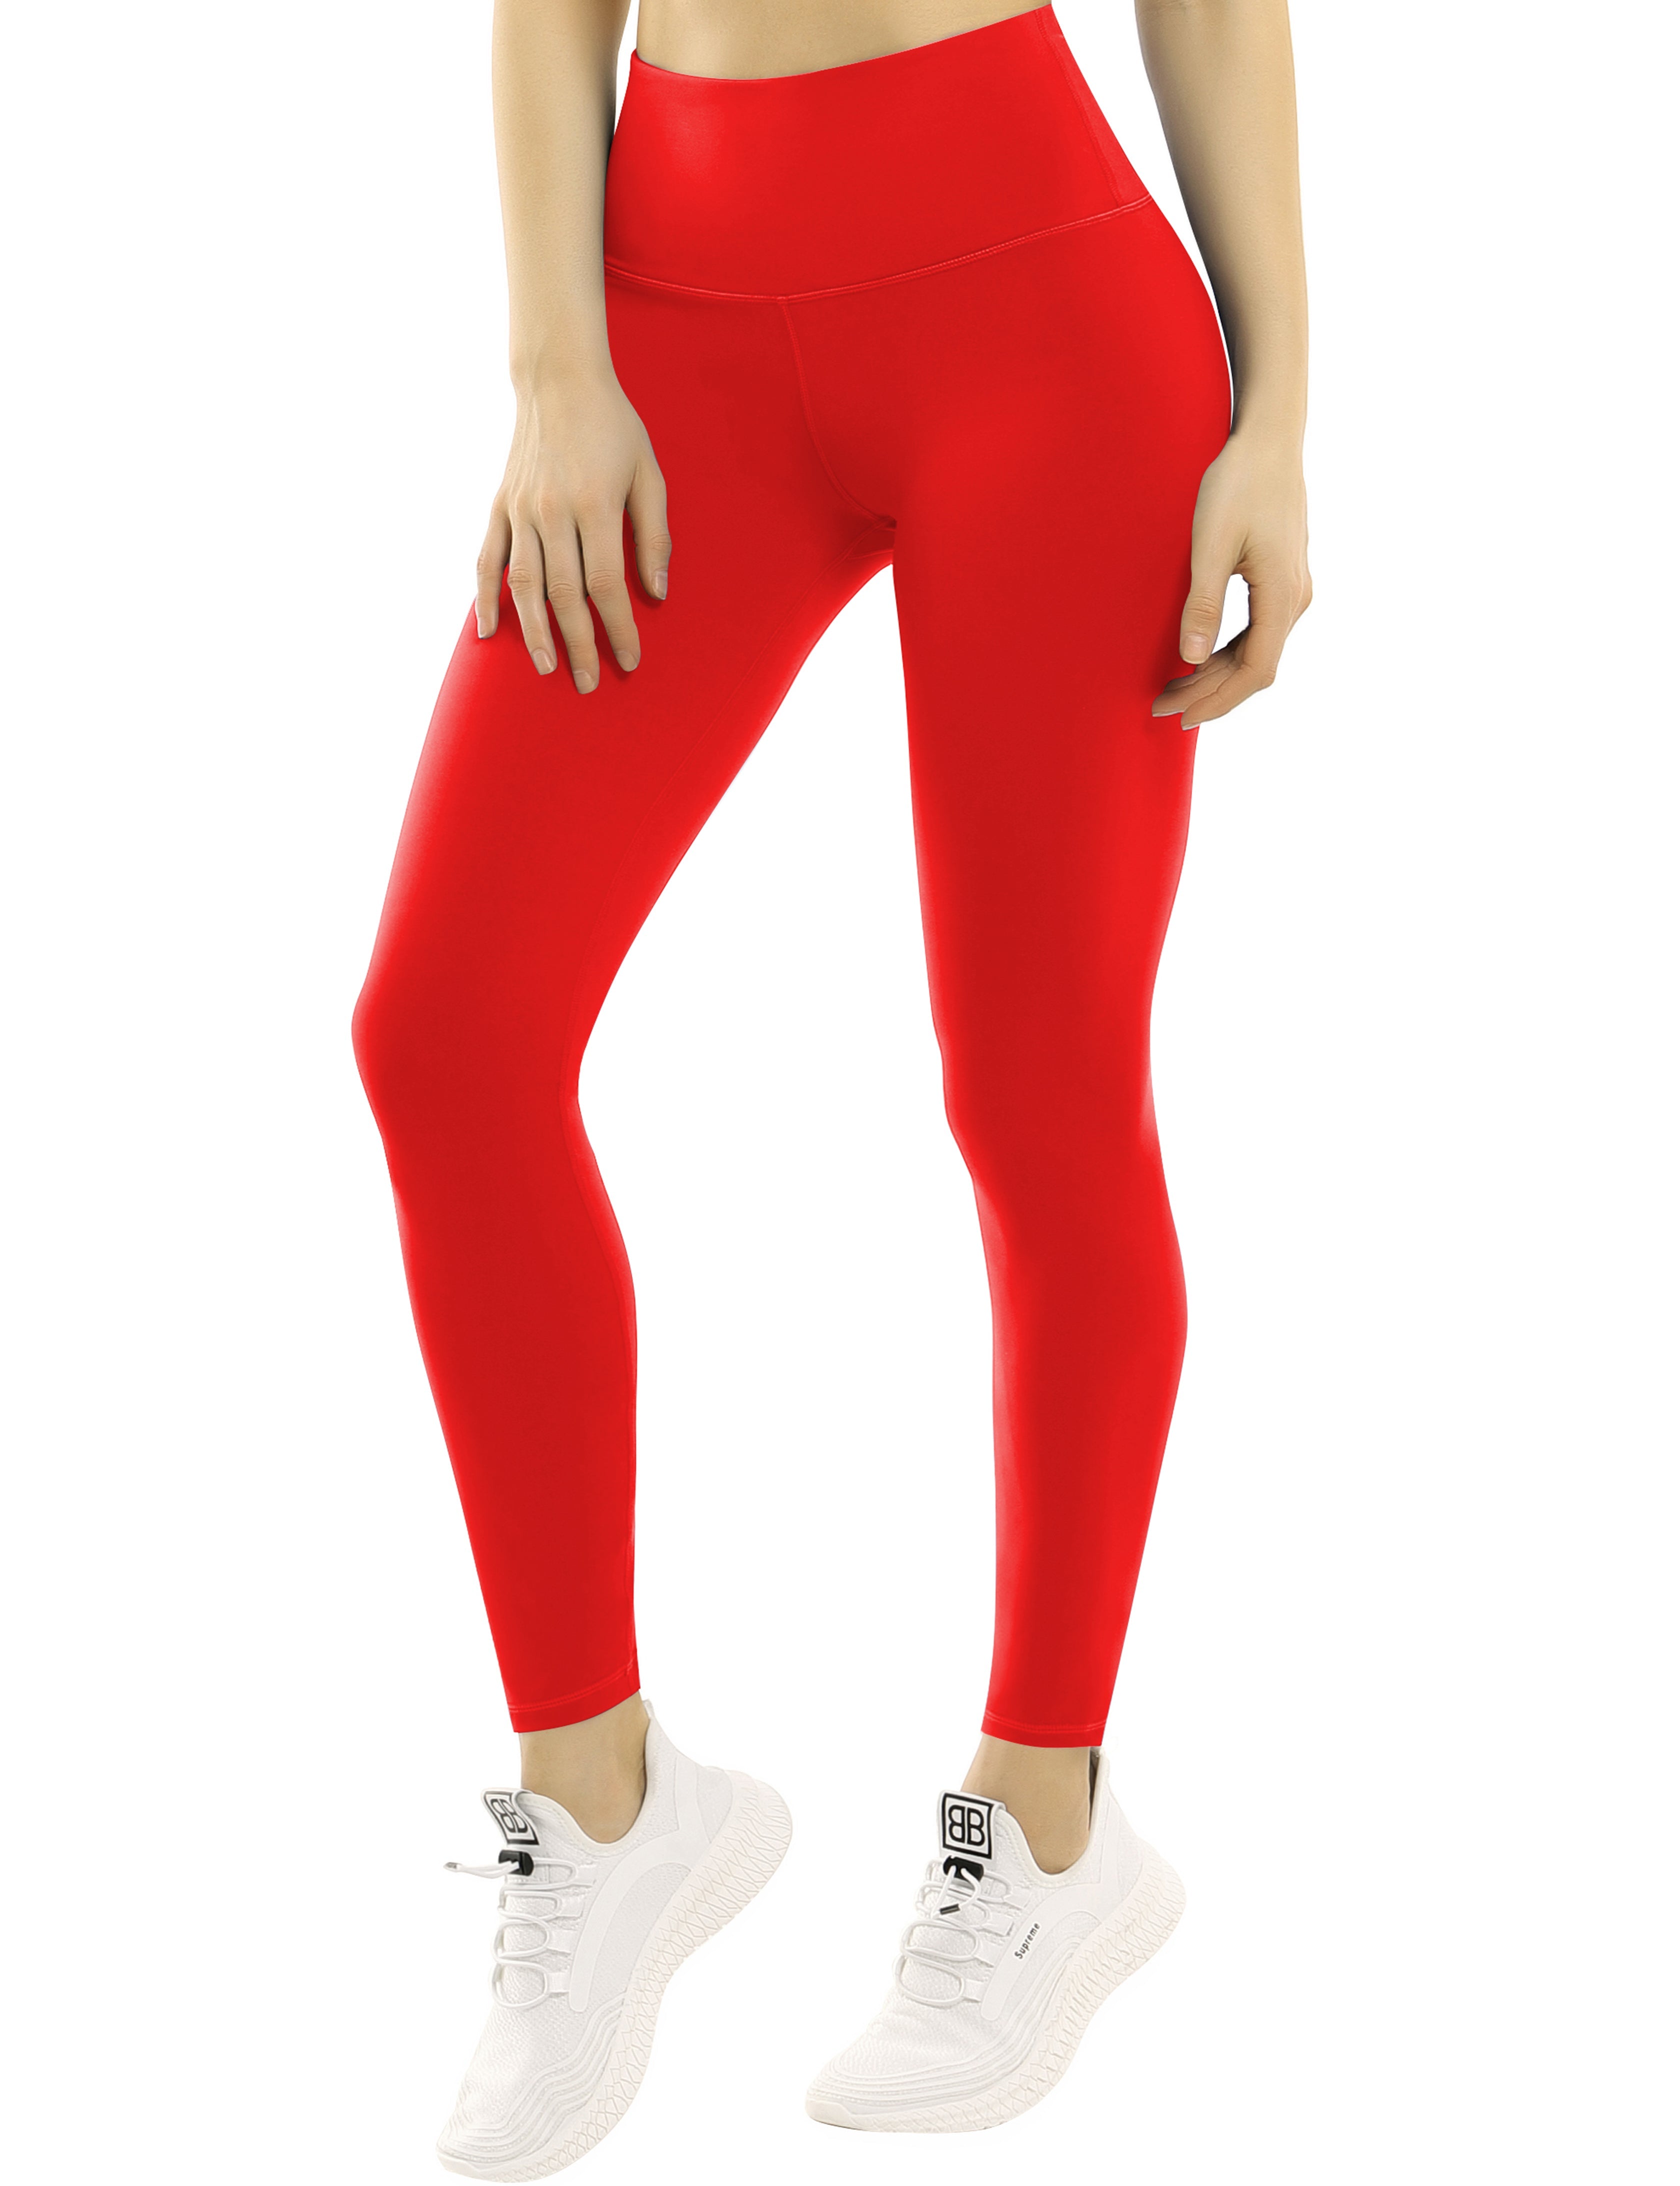 High Waist Running Pants scarlet 75%Nylon/25%Spandex Fabric doesn't attract lint easily 4-way stretch No see-through Moisture-wicking Tummy control Inner pocket Four lengths